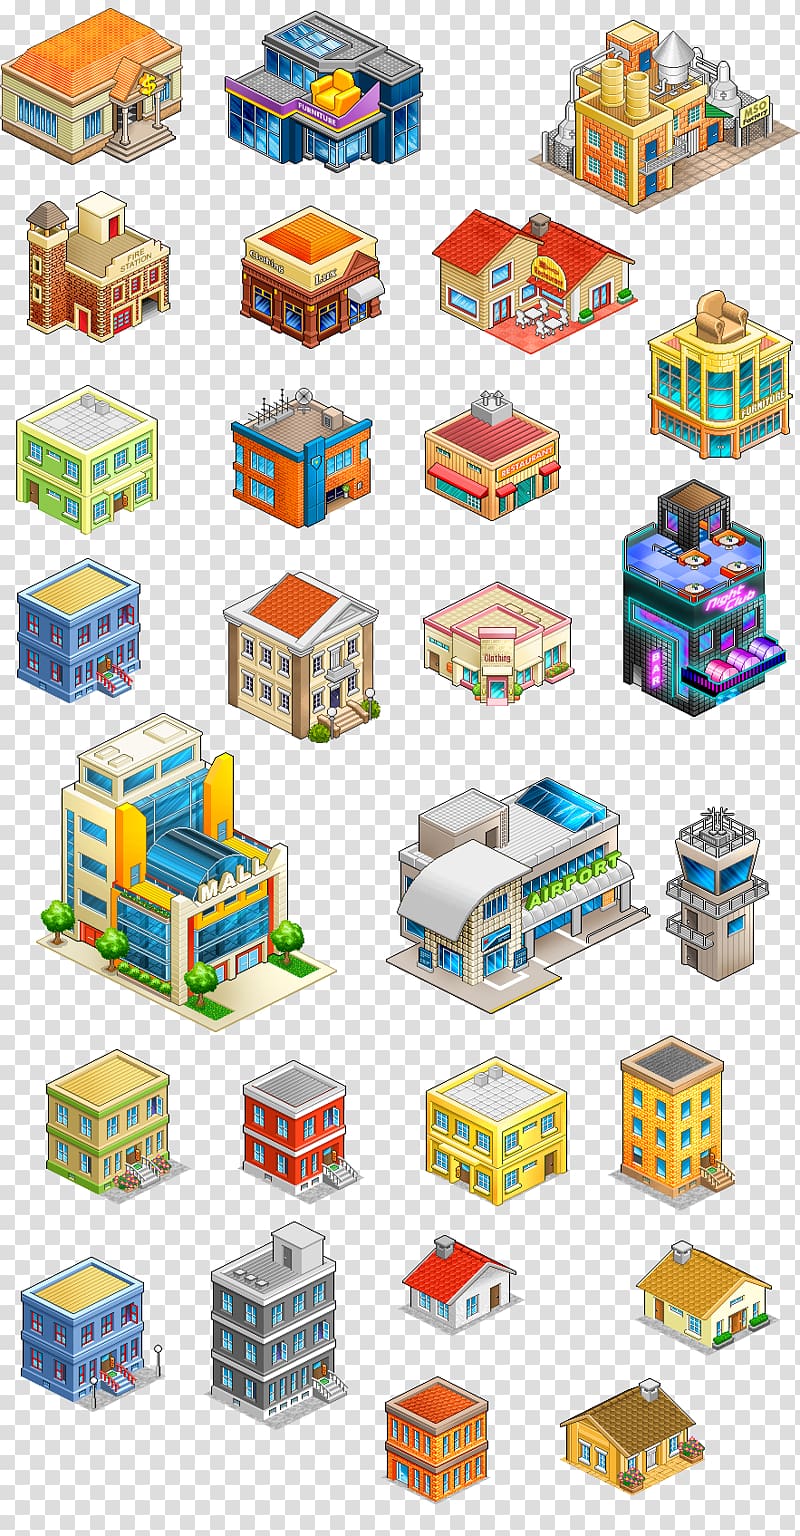 house and building game application , Building Isometric projection Isometric graphics in video games and pixel art, isometric transparent background PNG clipart